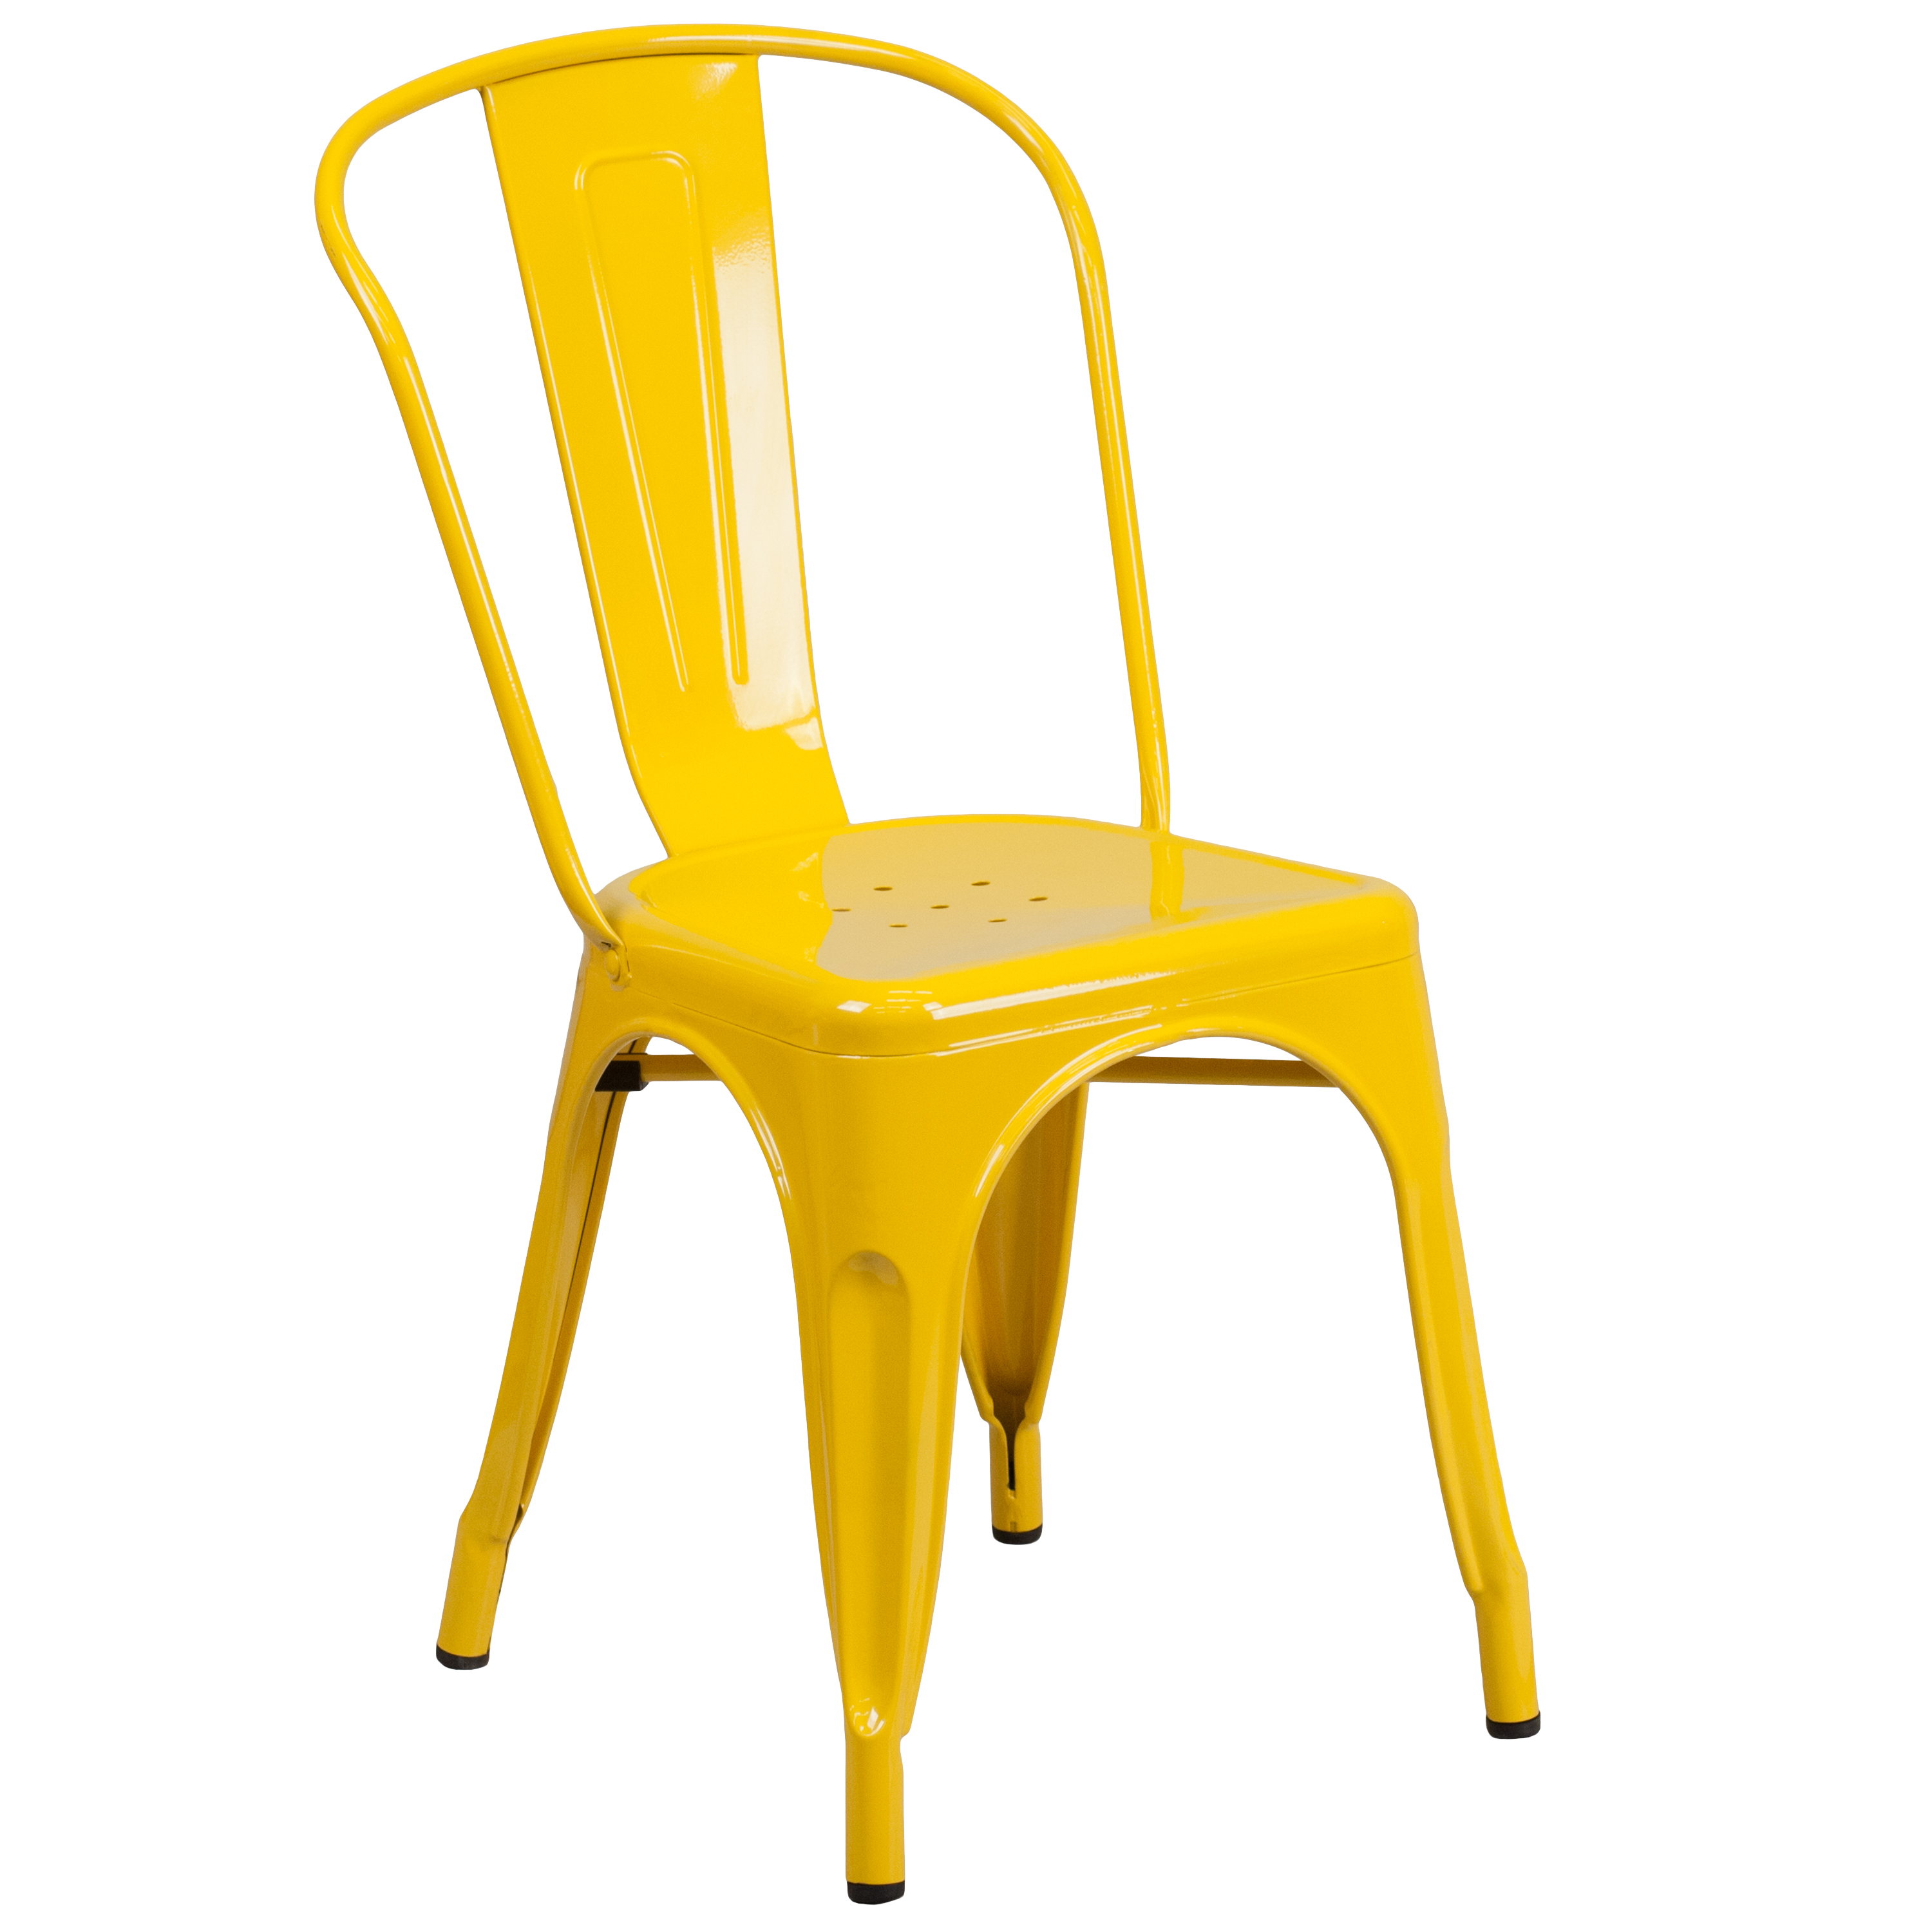 Flash Furniture CH-31230-YL-GG Yellow Metal Indoor/Outdoor Stackable Chair